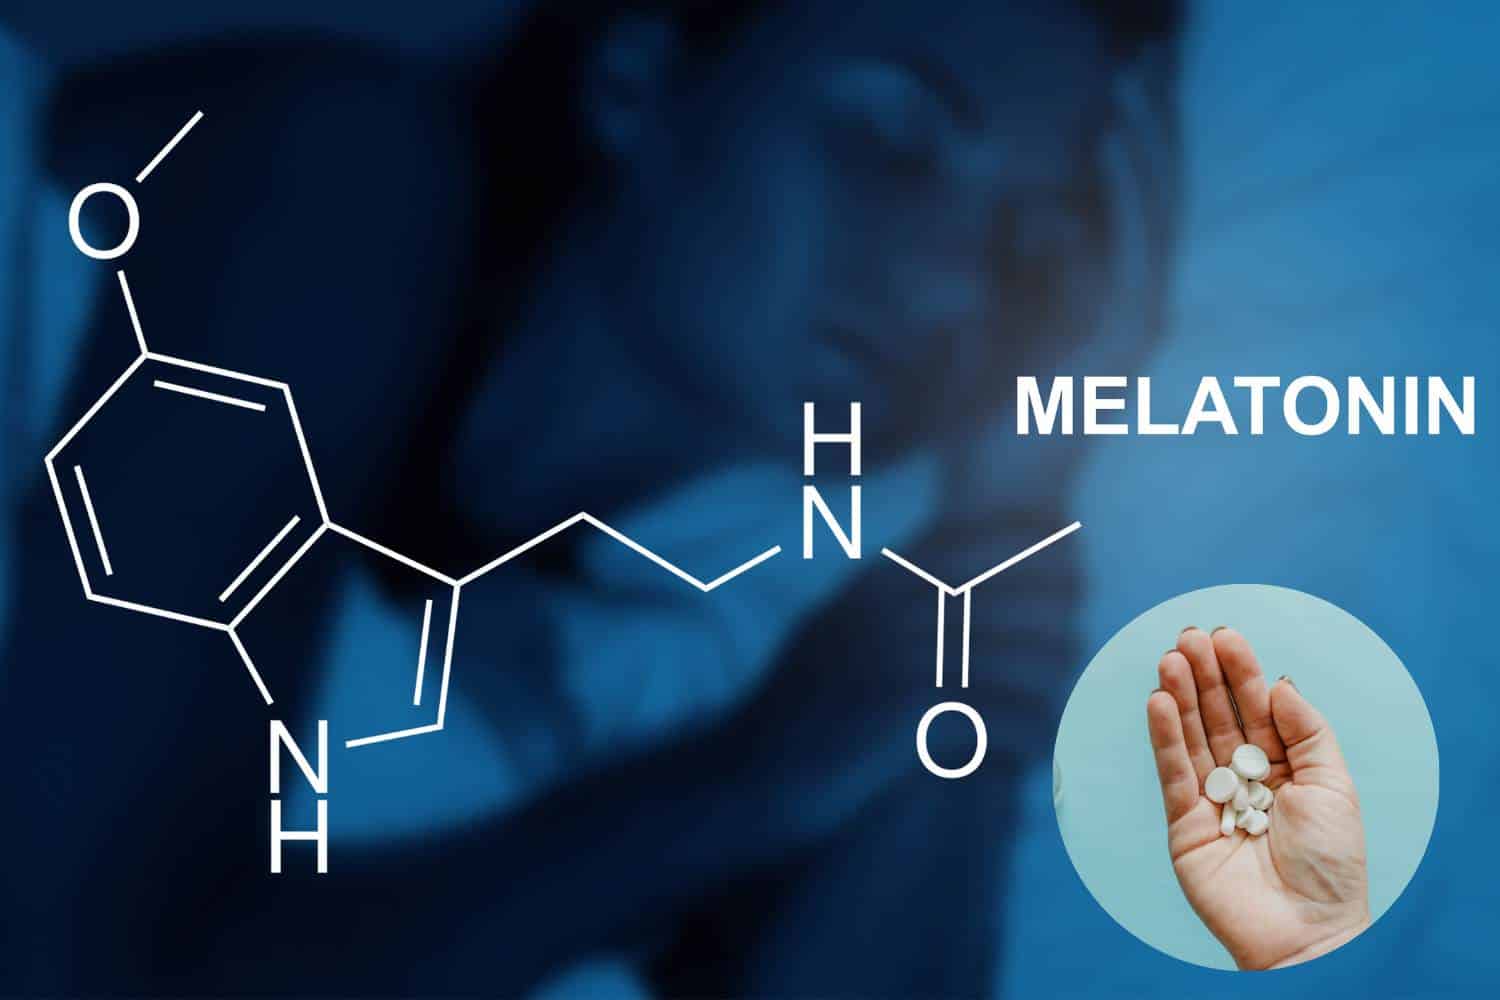 A dark blue image of a woman sleeping on her side, with 'Melatonin' text and its chemical structure overlaid.